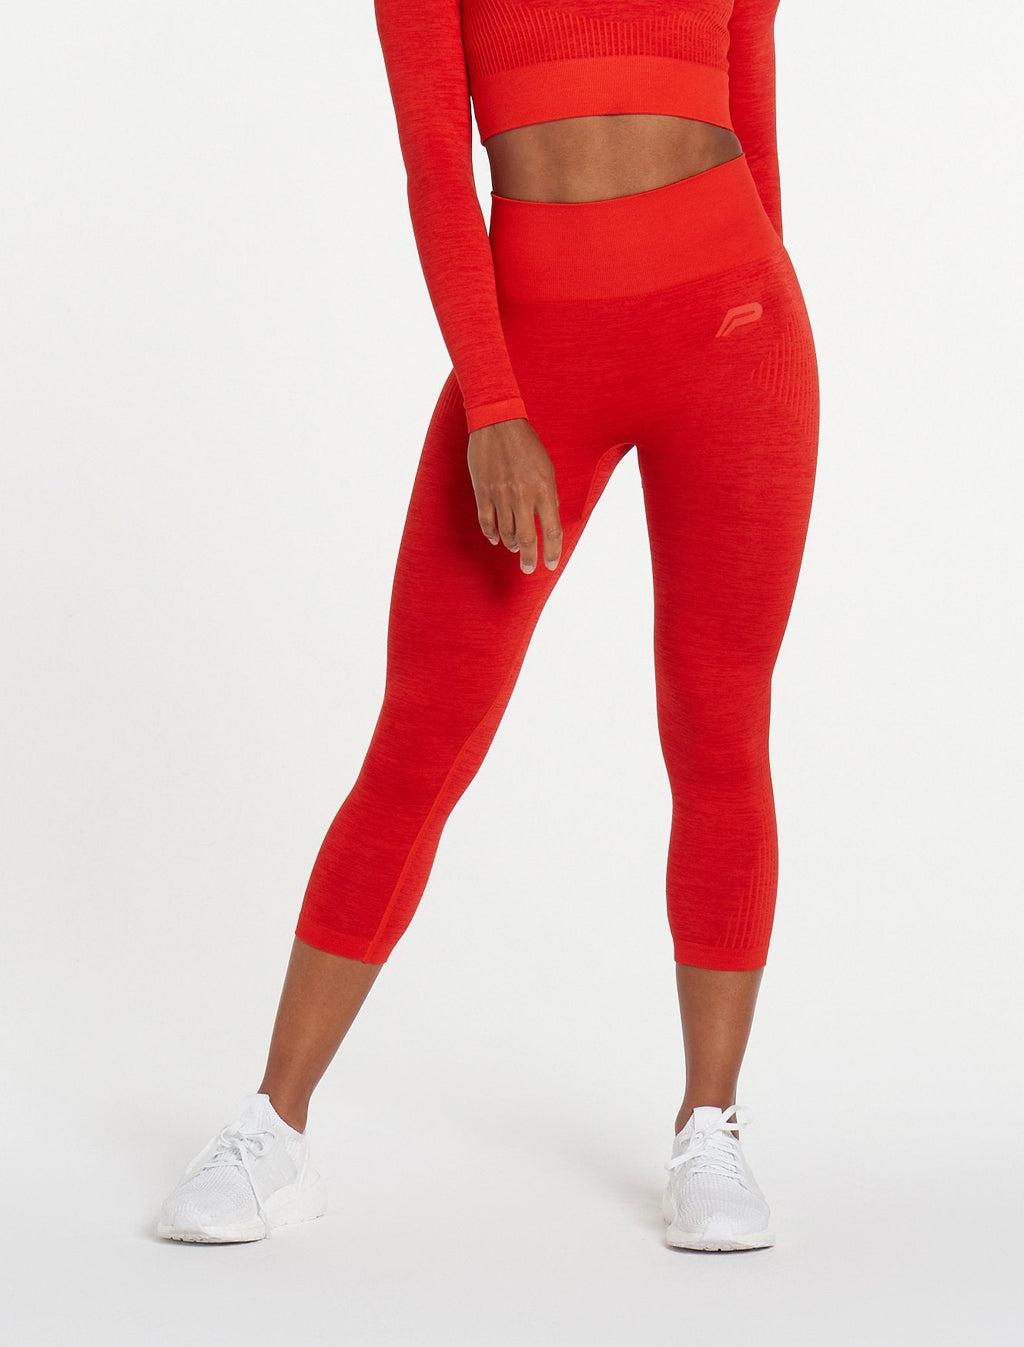 products/womens-adapt-seamless-34-leggings-red.jpg